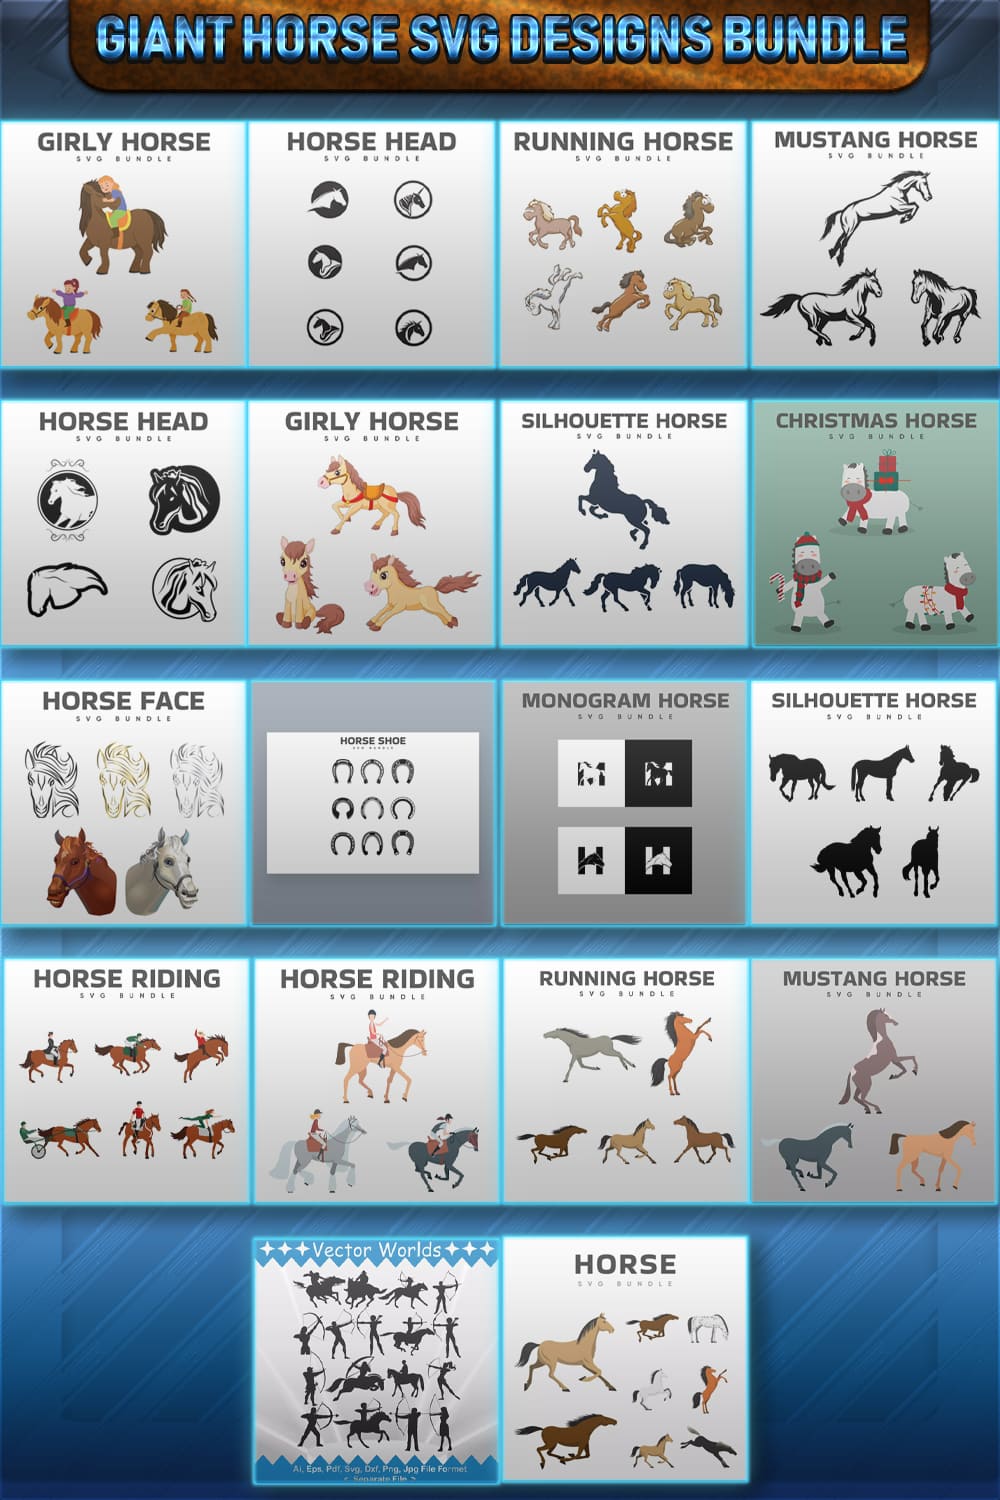 Large poster of horses and their names.